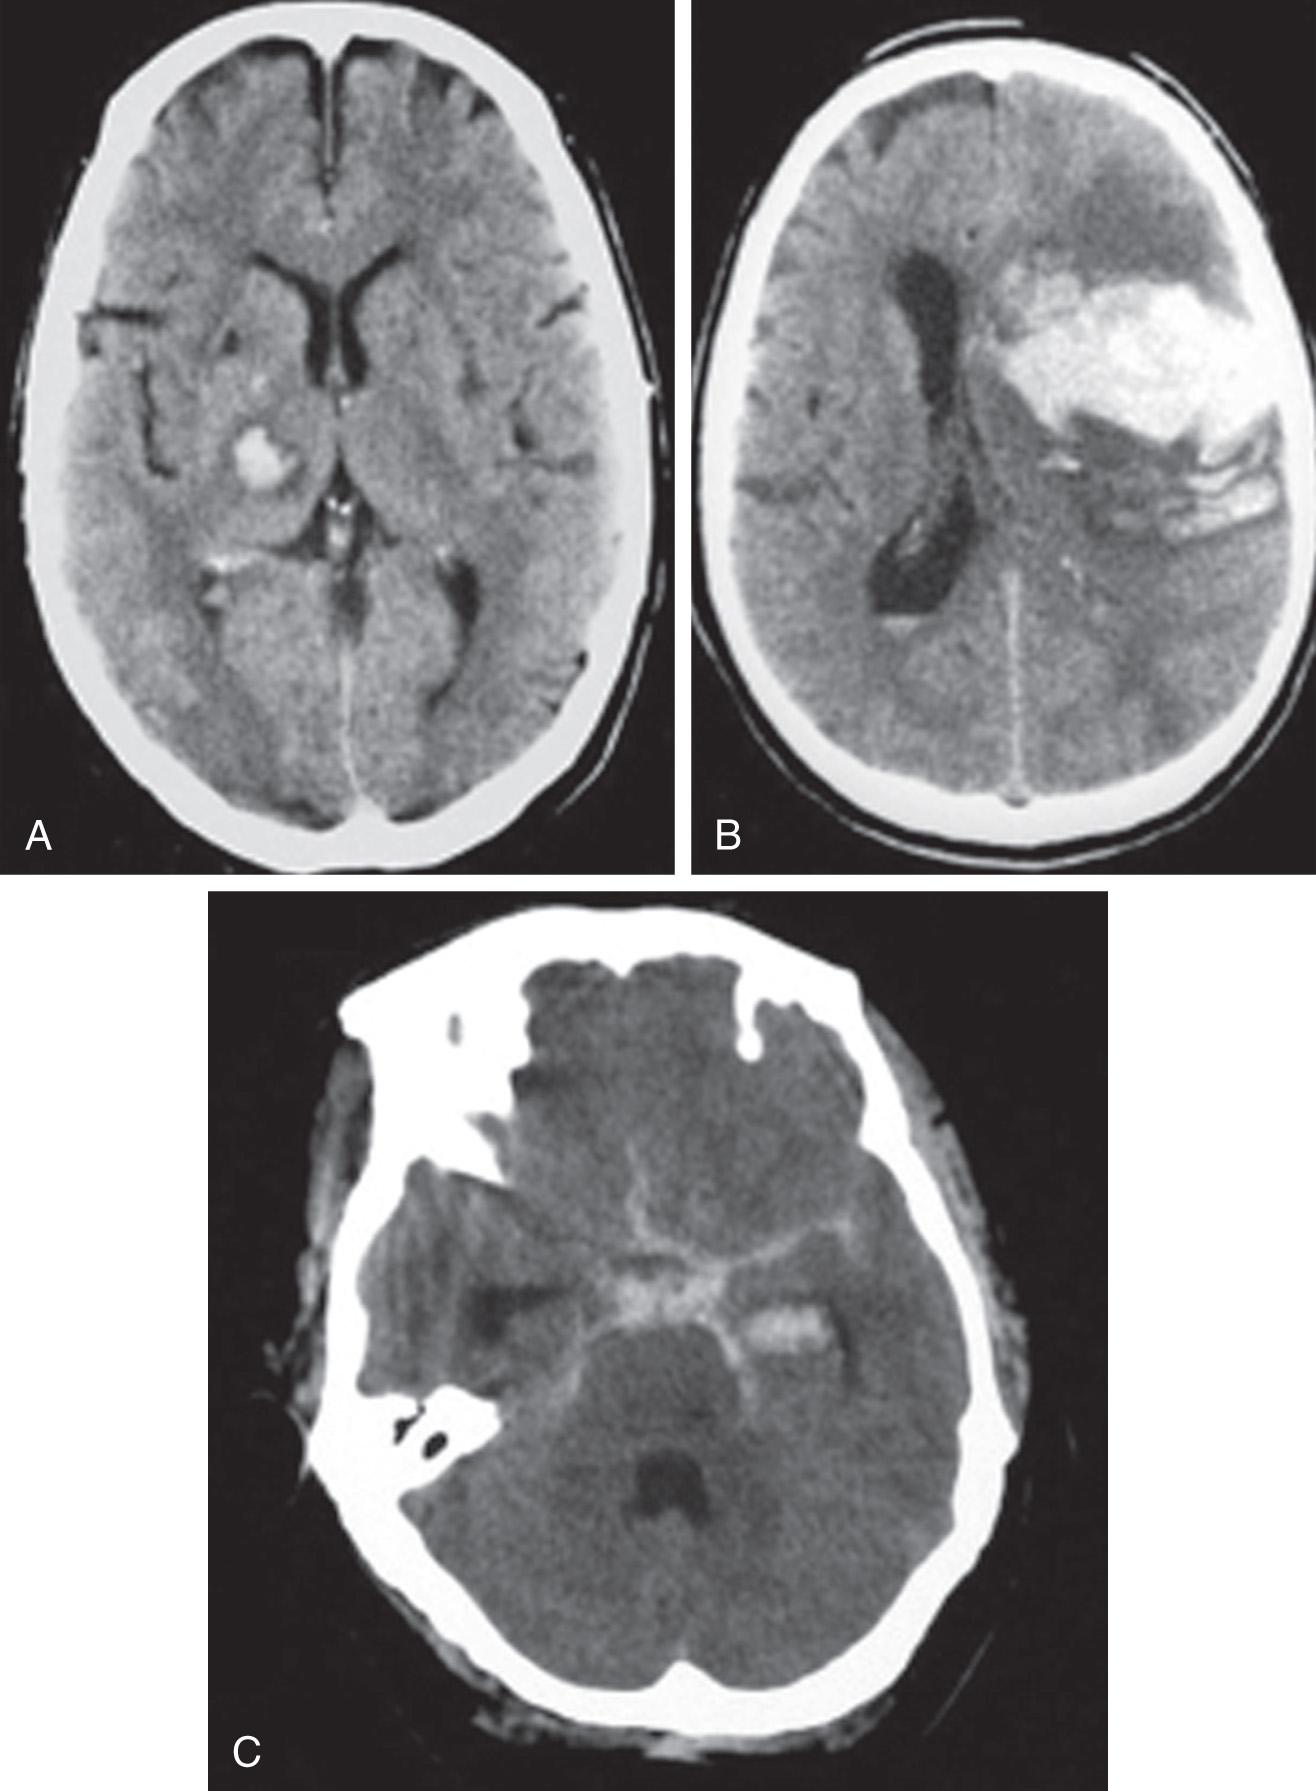 Fig. 60.1, Computed tomography (CT) of the head showing different types of hemorrhagic strokes, with the acute hemorrhage appearing hyperdense. A, Small deep parenchymal intracerebral hemorrhage (ICH) typically seen with uncontrolled hypertension. B, Lobar ICH typically seen with tumor or vascular malformation. C, Subarachnoid hemorrhage typically seen with ruptured berry aneurysm.